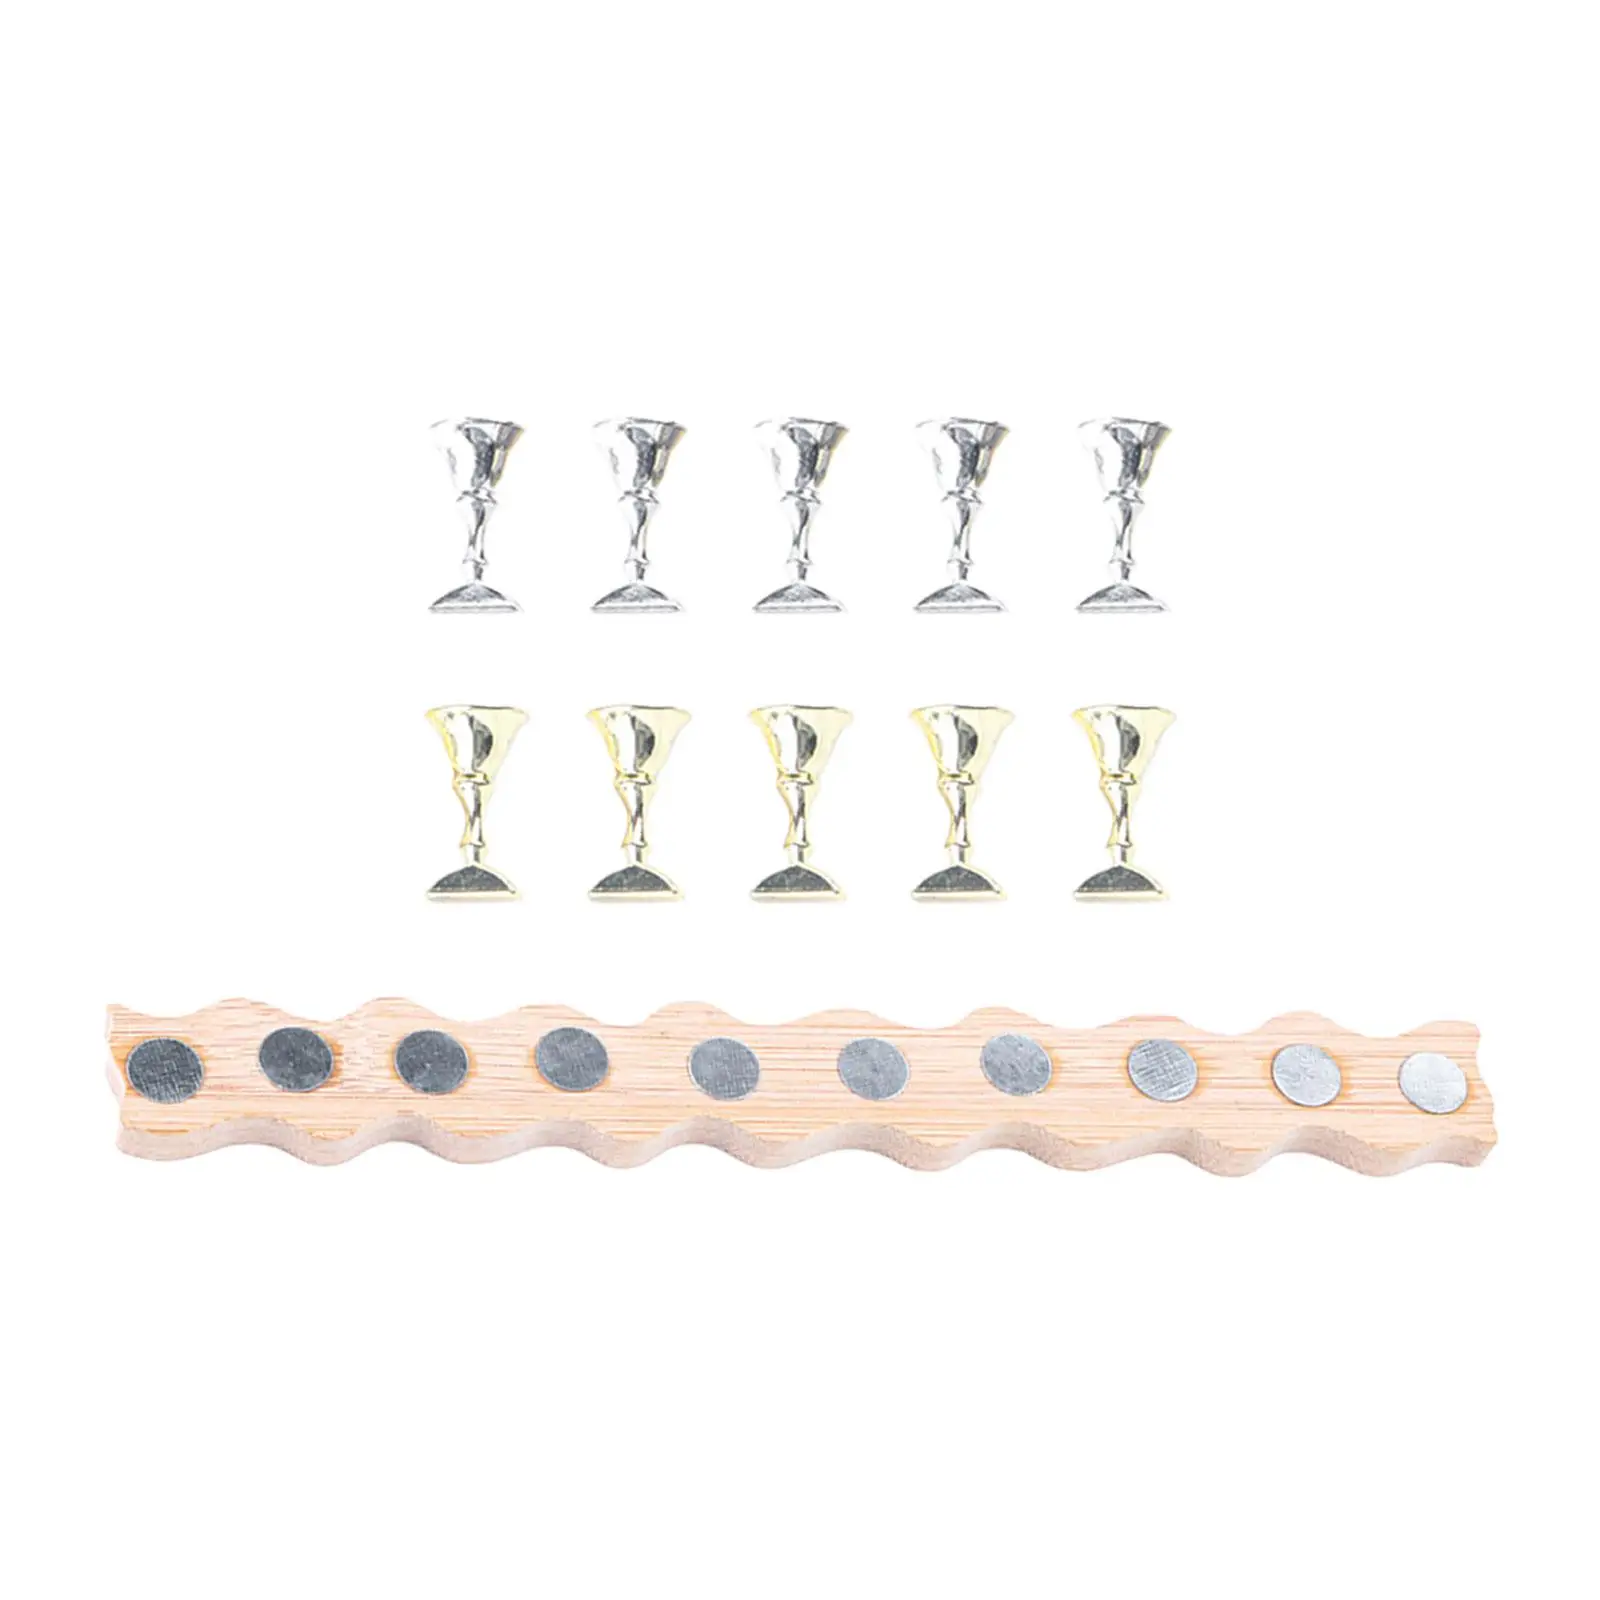 Nail Stand Accessories Reusable Nail Art Supplies Nail Showing Shelf for Beginner Home Salon DIY Manicurists Training Practice